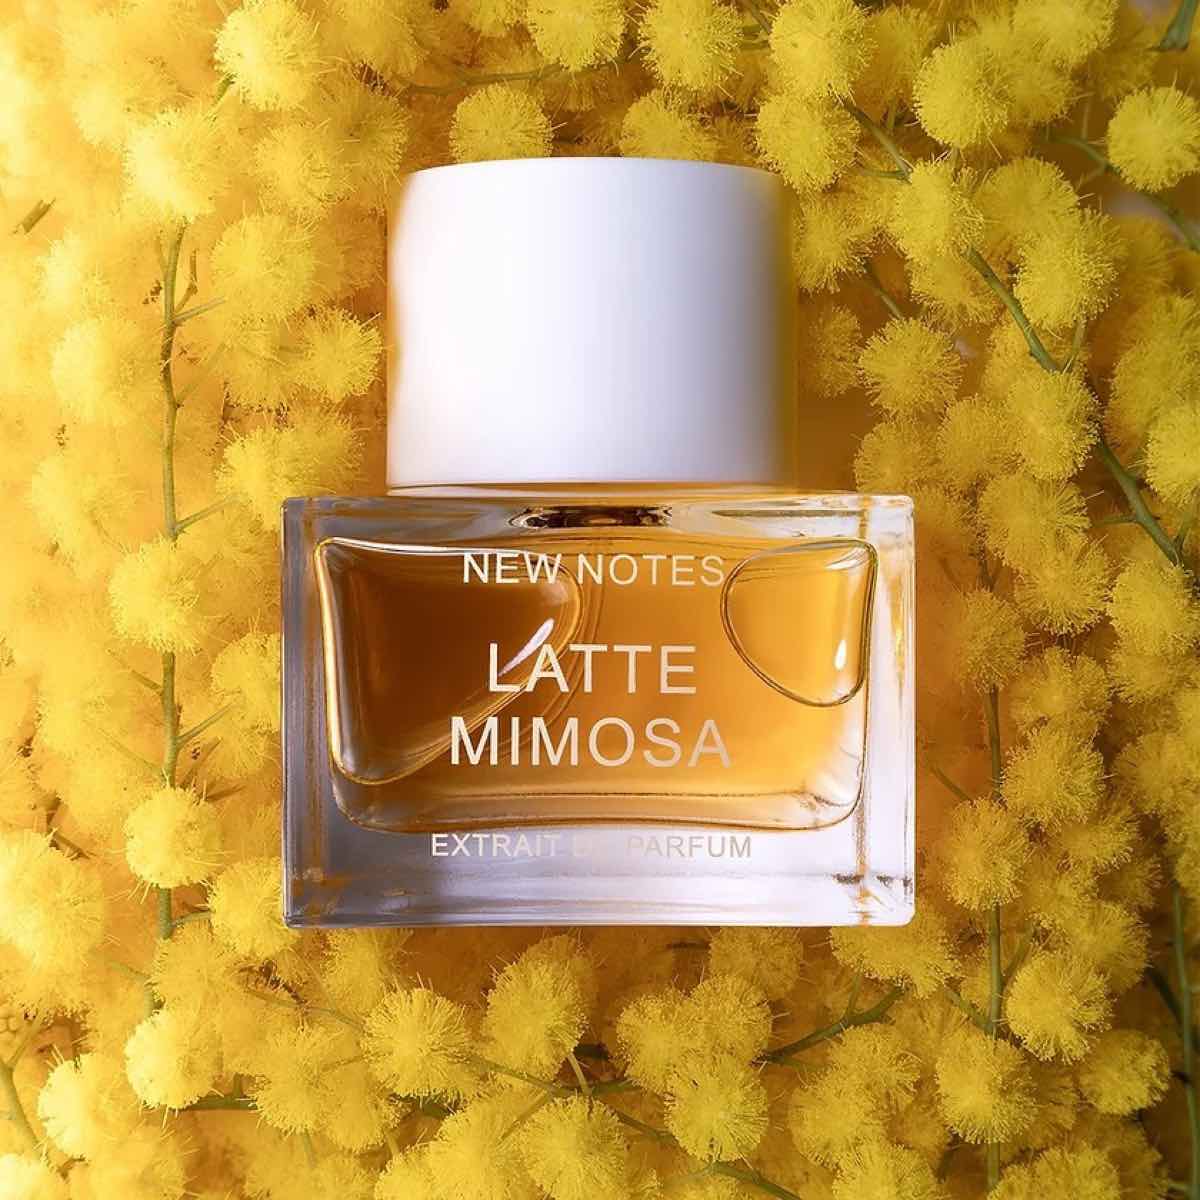 Latte Mimosa New Notes